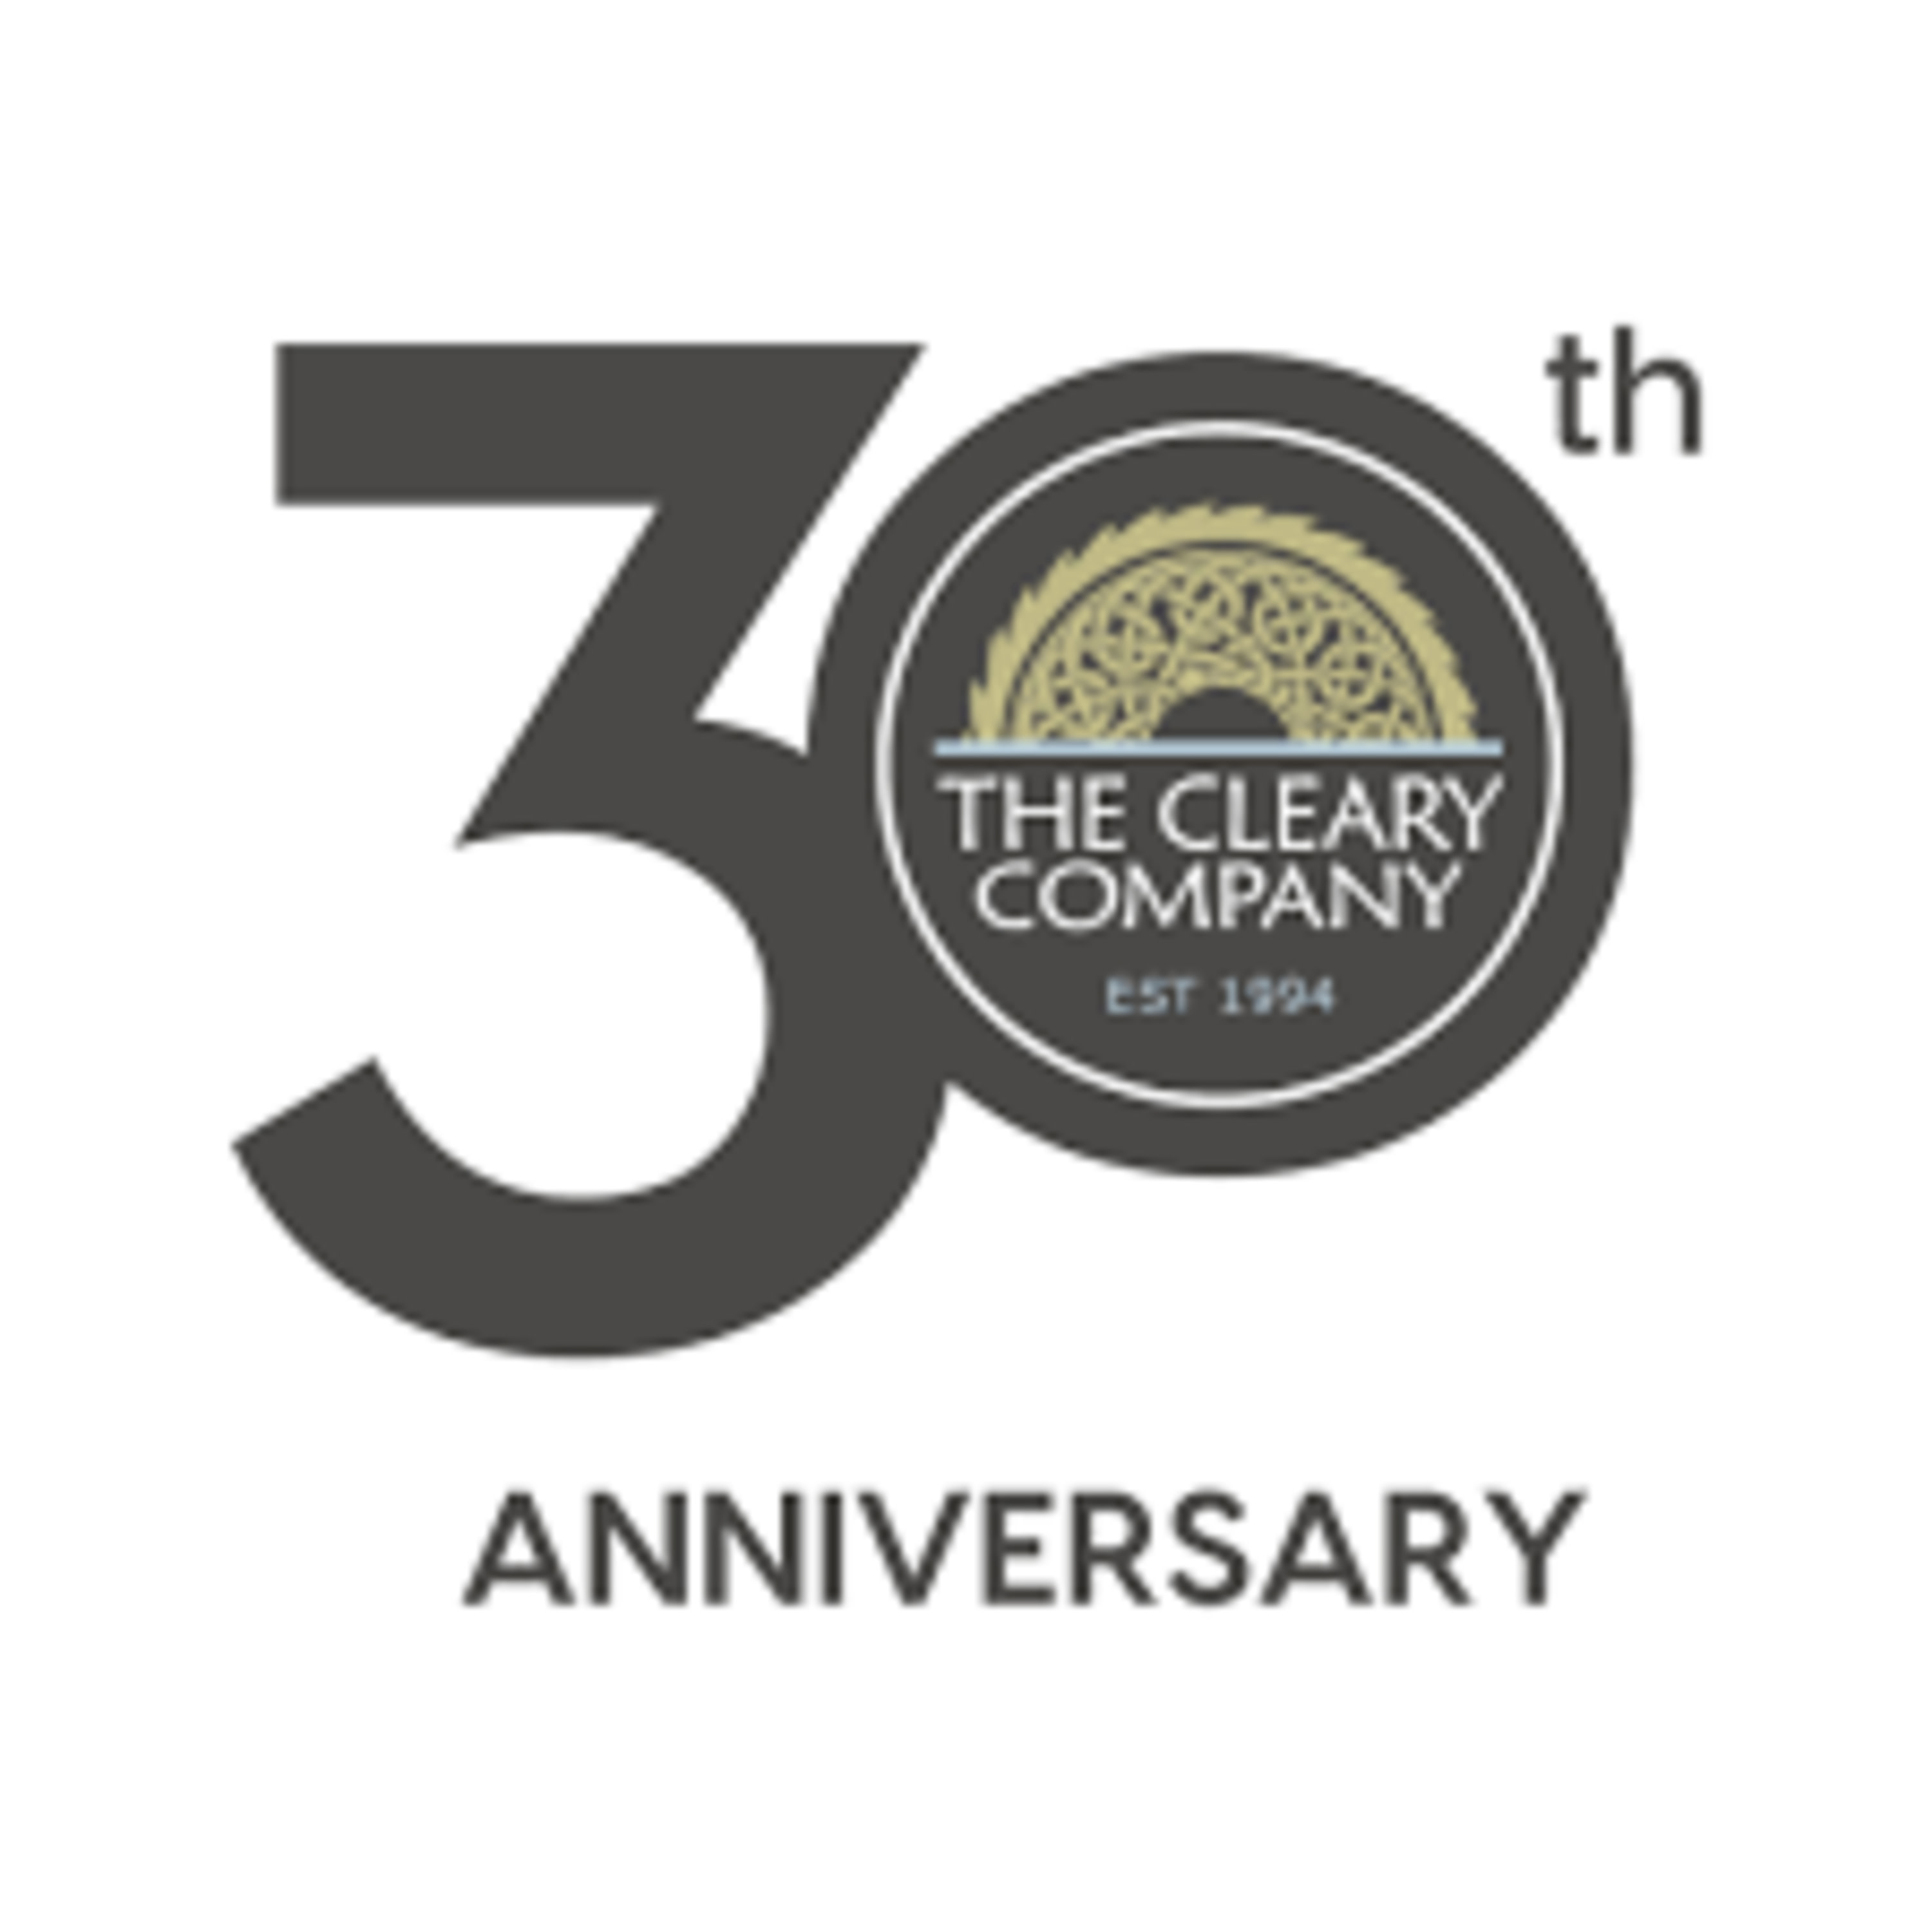 The Cleary Company: 30 Years of Building Dreams and Nurturing Community Ties